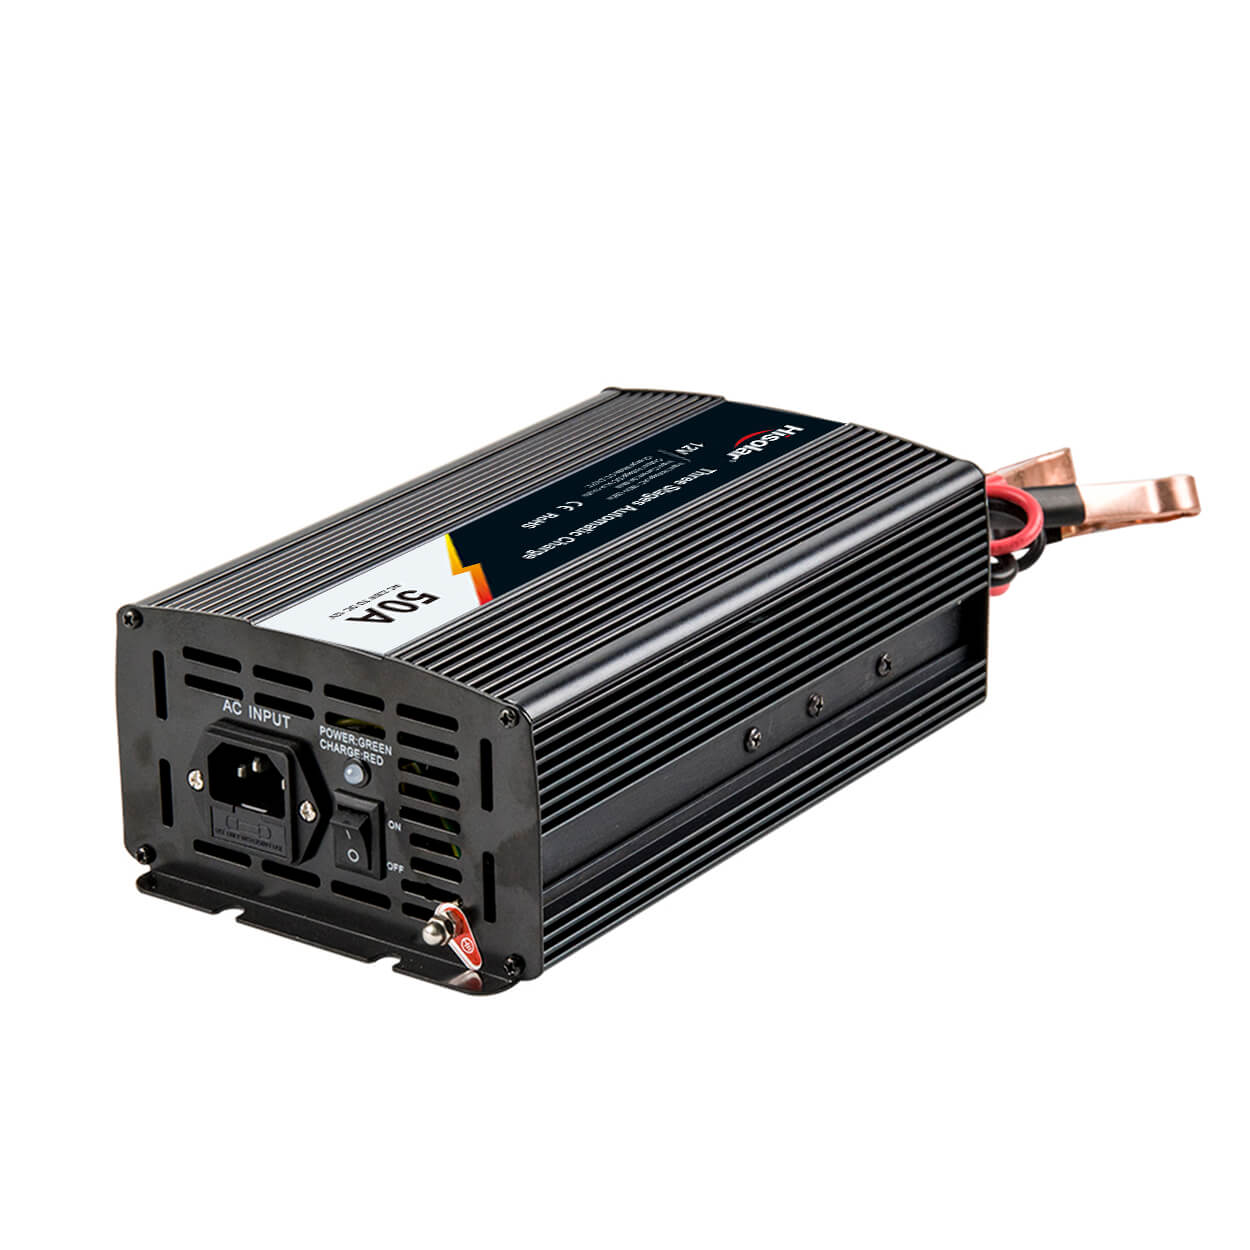 High Power Lead Acid Battery Charger For Car